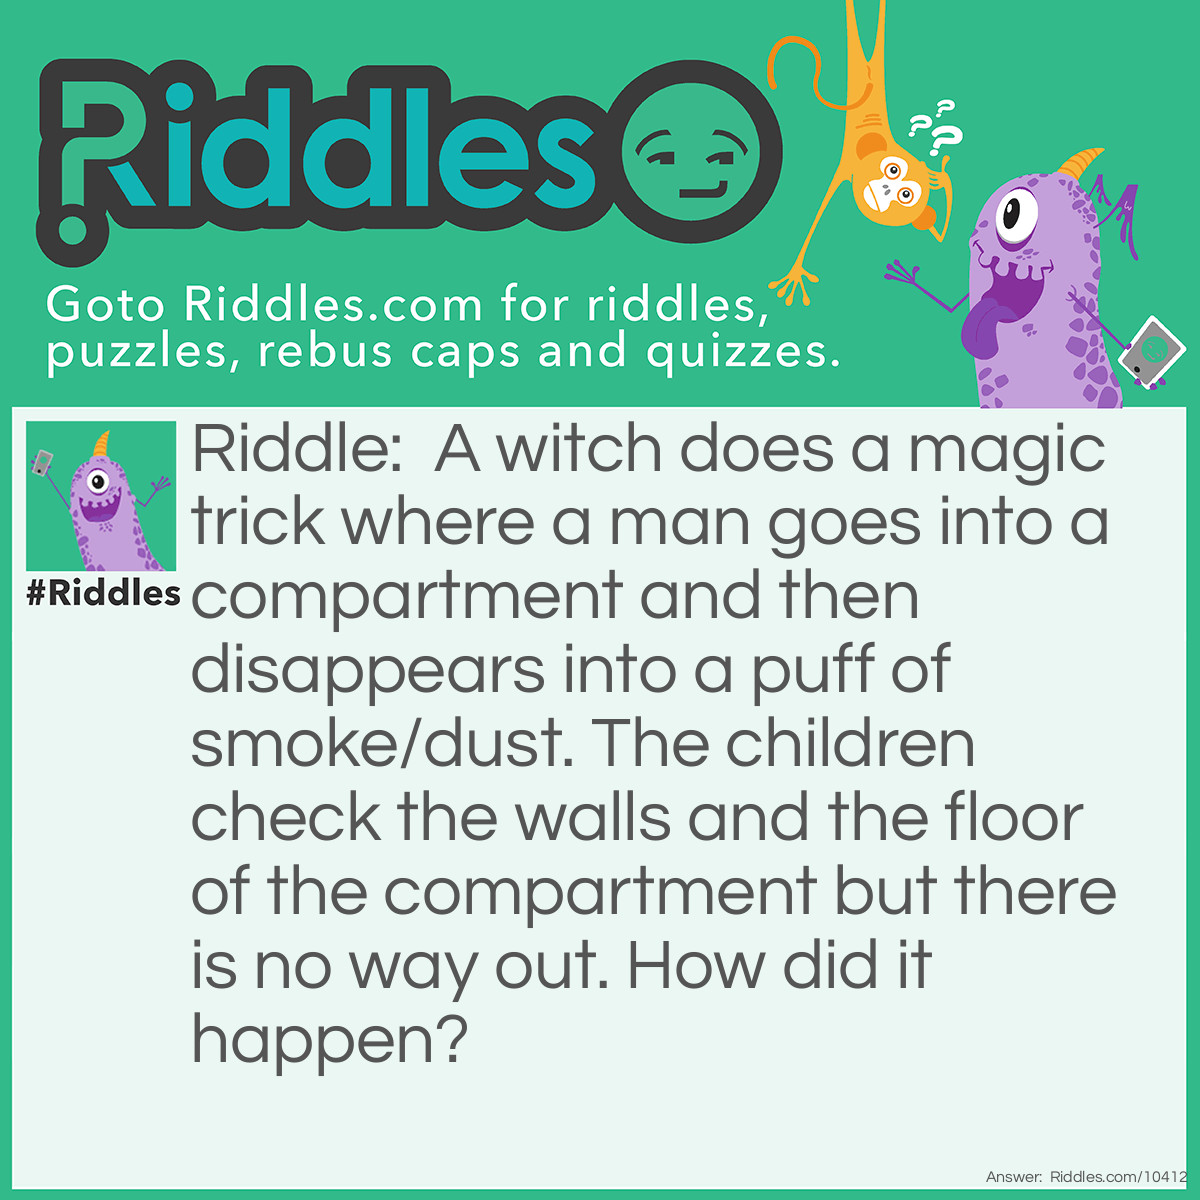 Riddle: A witch does a magic trick where a man goes into a compartment and then disappears into a puff of smoke/dust. The children check the walls and the floor of the compartment but there is no way out. How did it happen? Answer: The magic compartment makes time go fast so the man lives in the compartment for all of his whole life and then turns to dust when he dies.